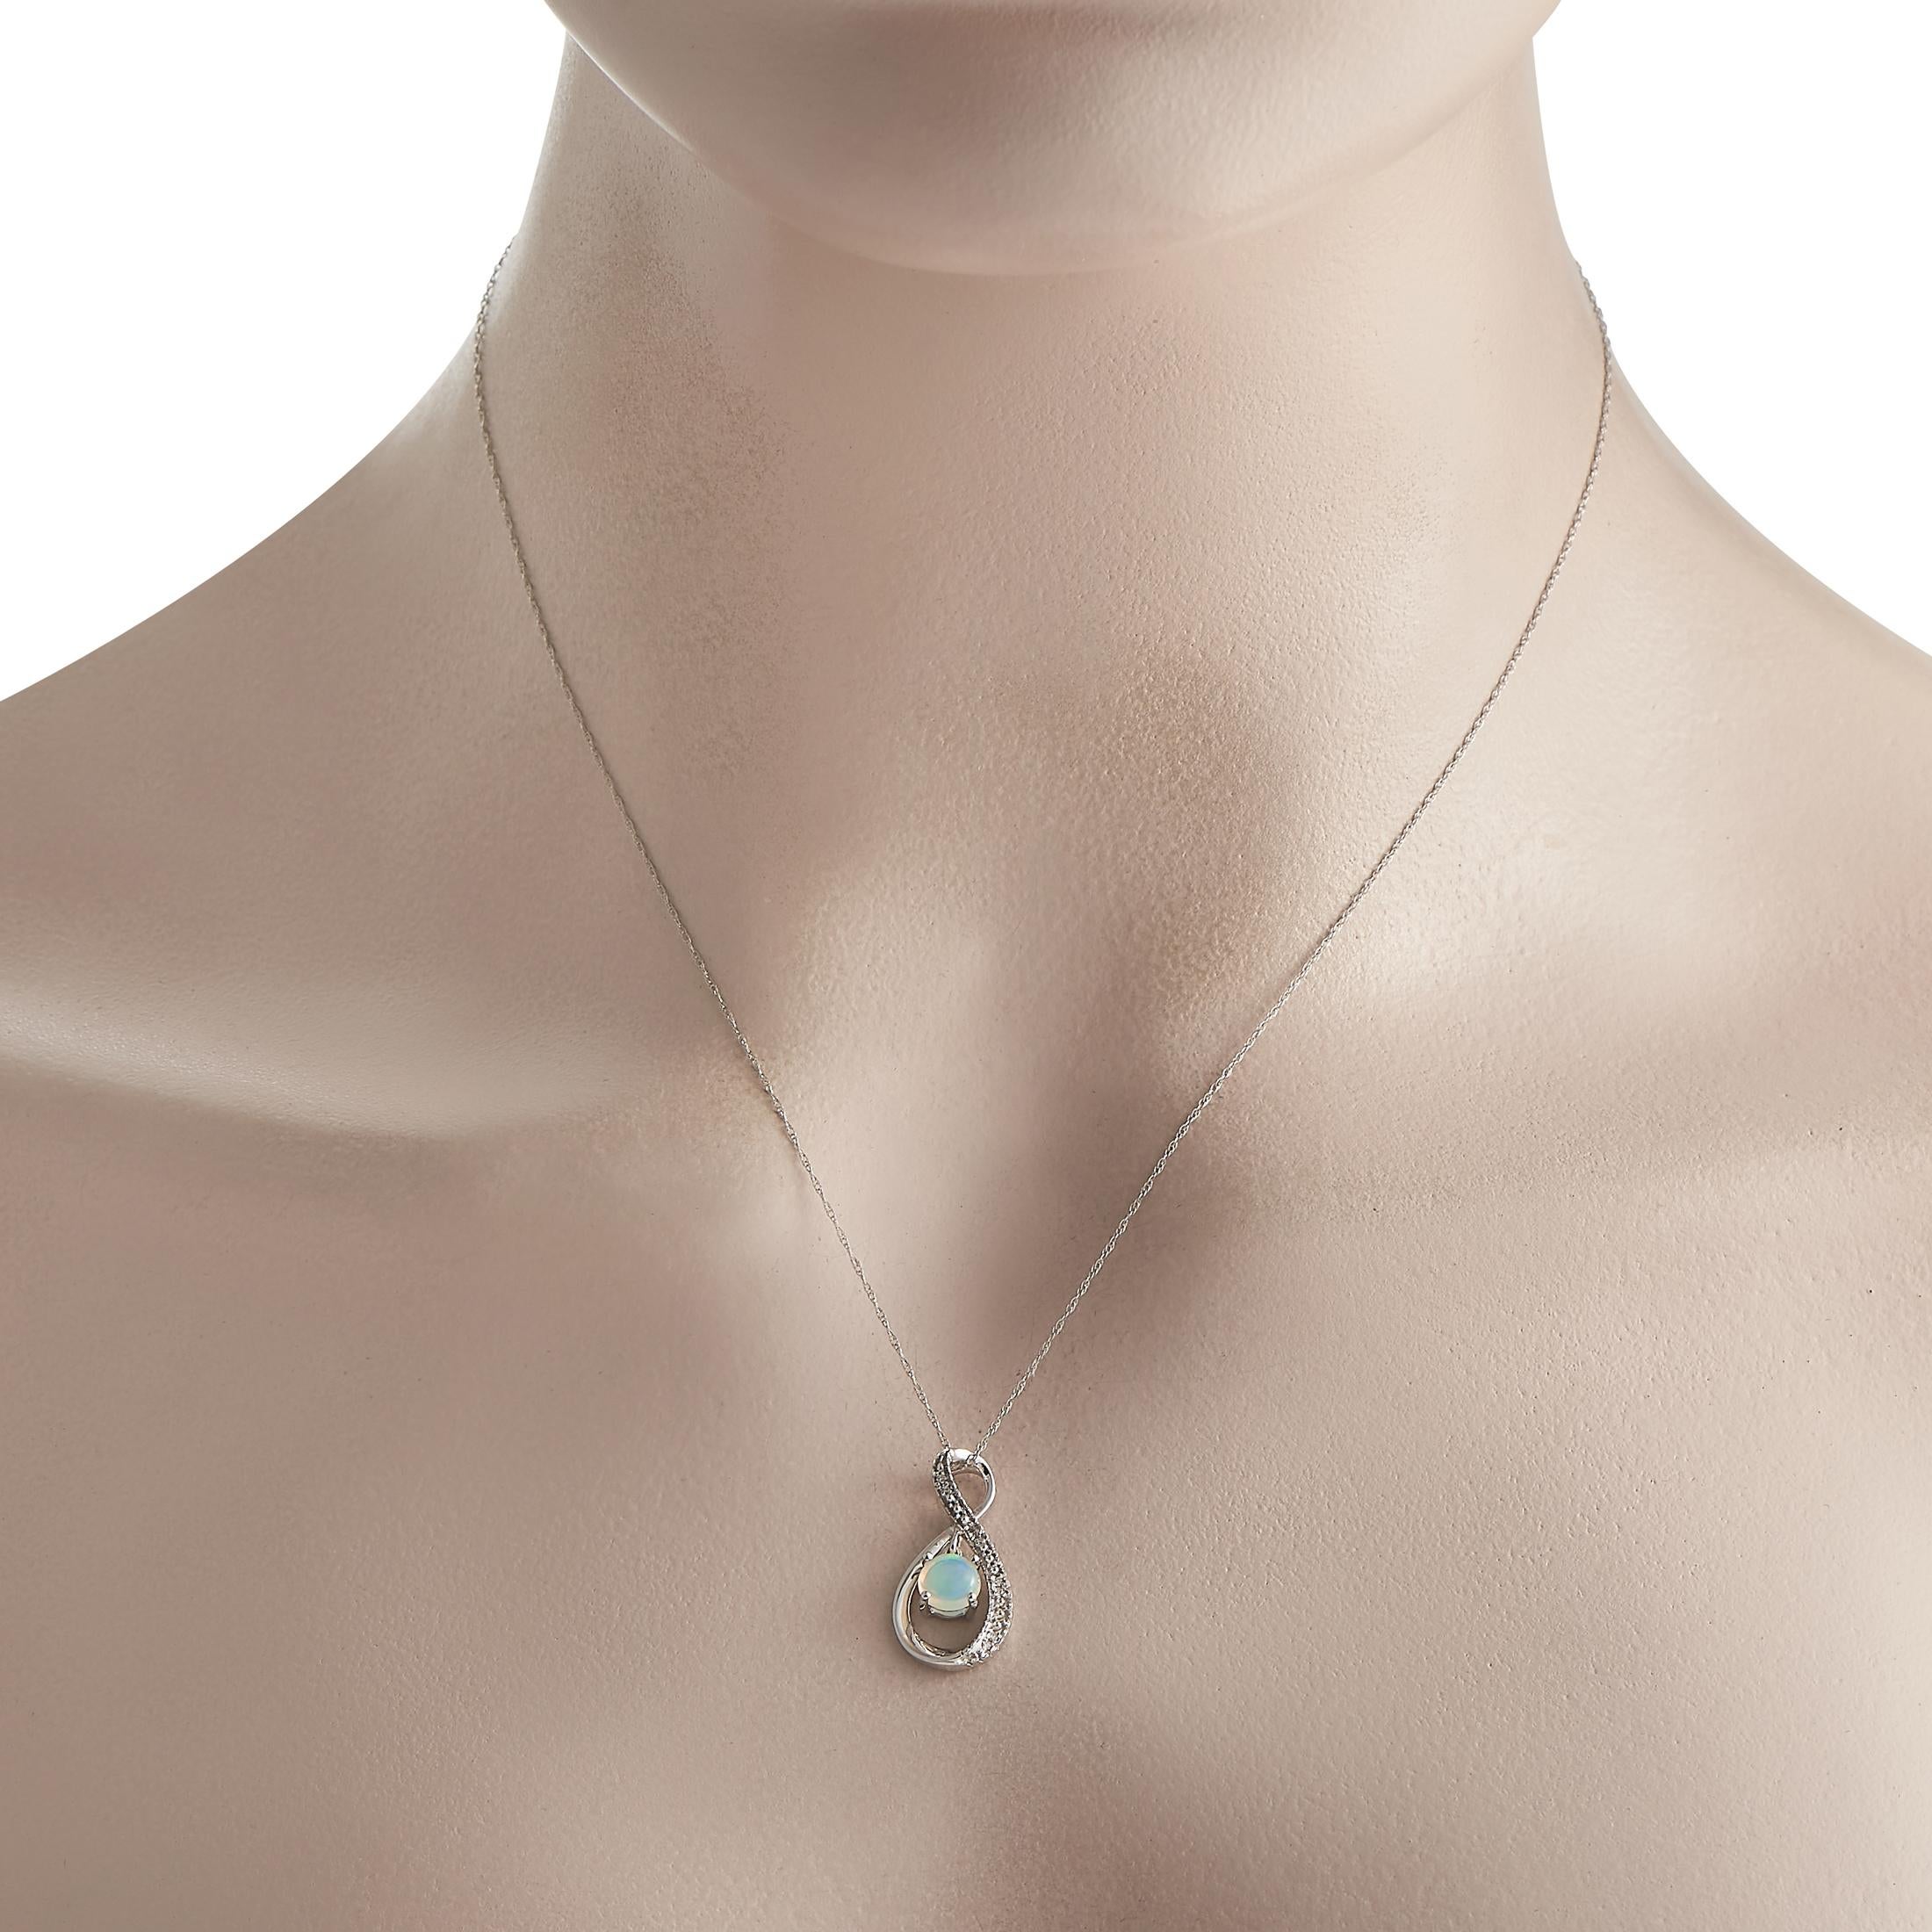 This white gold necklace fascinates with its brilliant display of spectral colors. It holds an opal gem, the October birthstone, that plays with light and gives off a rainbow of beauty. The slim, double cable chain neckalce measures 18 inches long